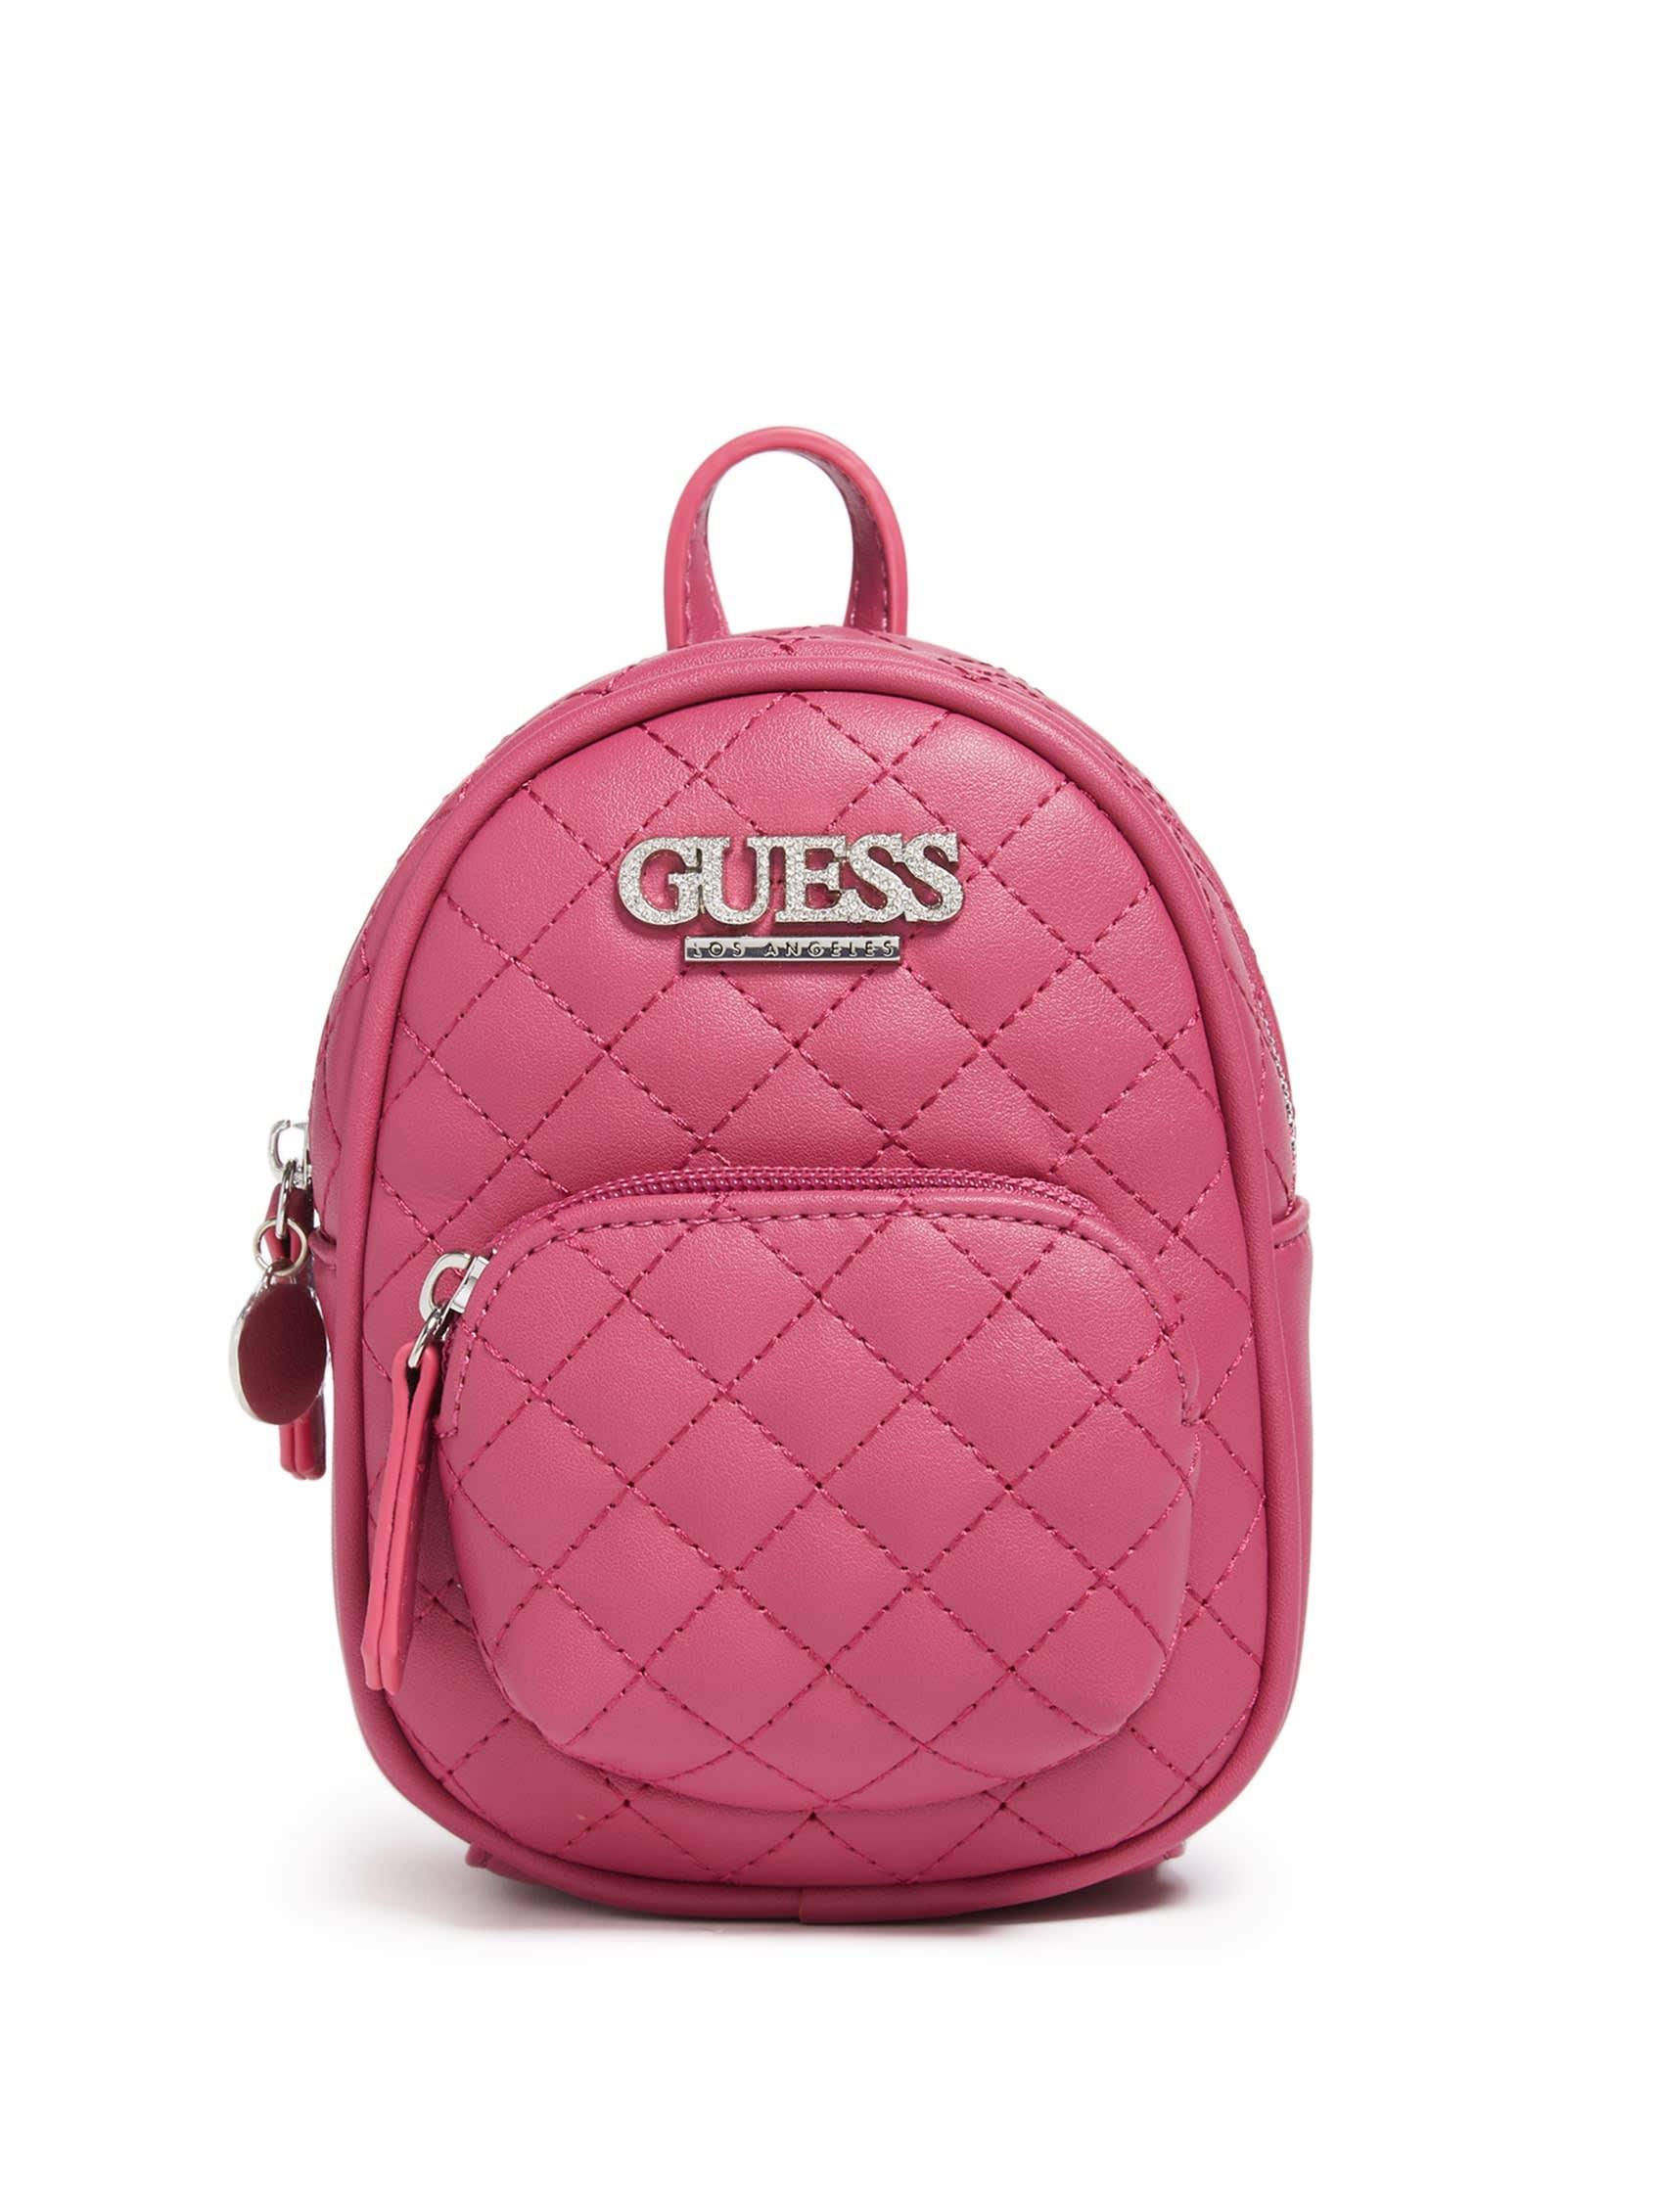 Guess Women Evan Faux Leather Crossbody Mini Backpack NEW 